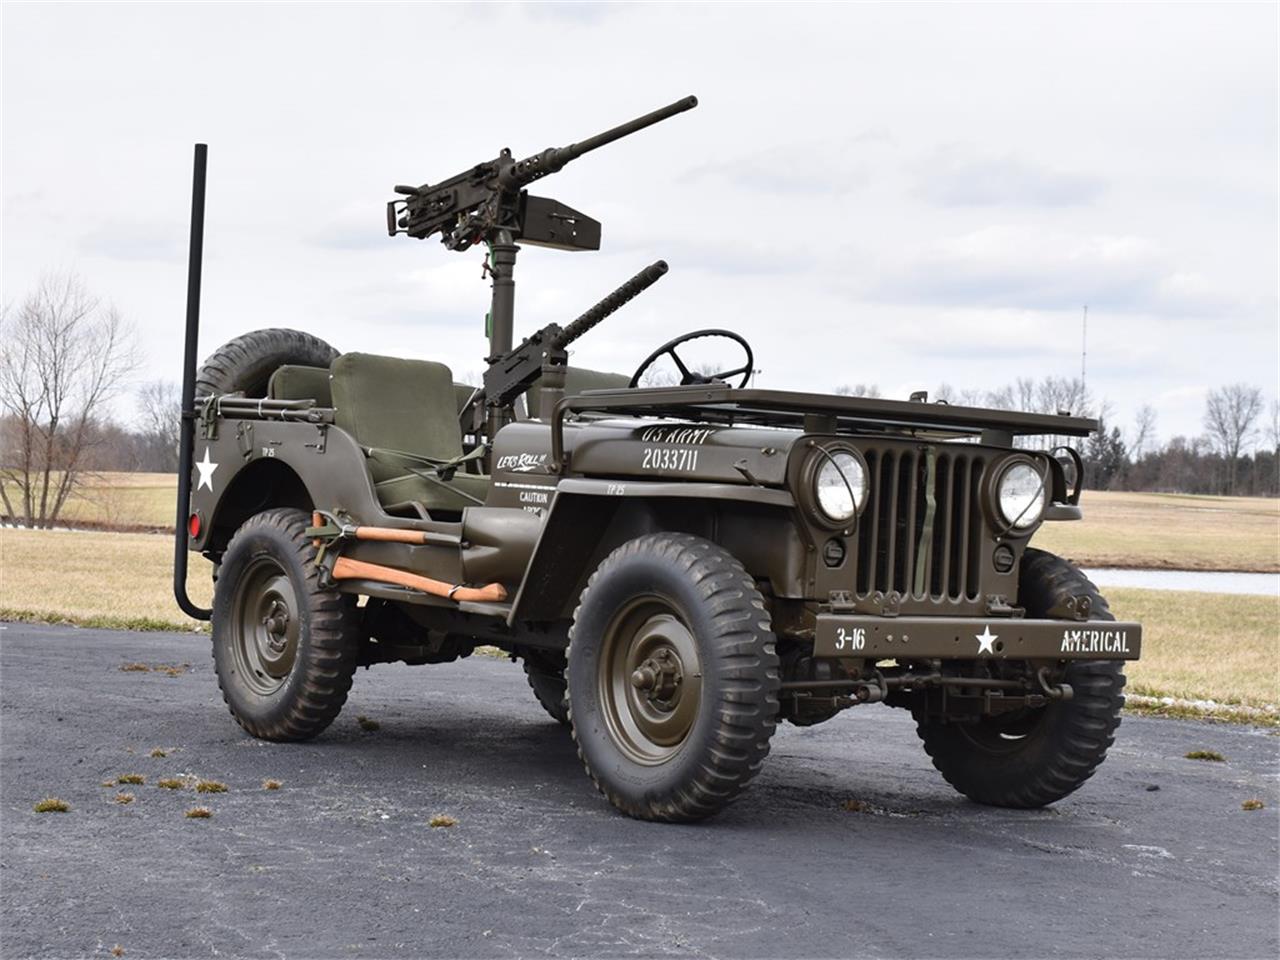 1951 Willys Army Jeep for Sale | ClassicCars.com | CC-1083697